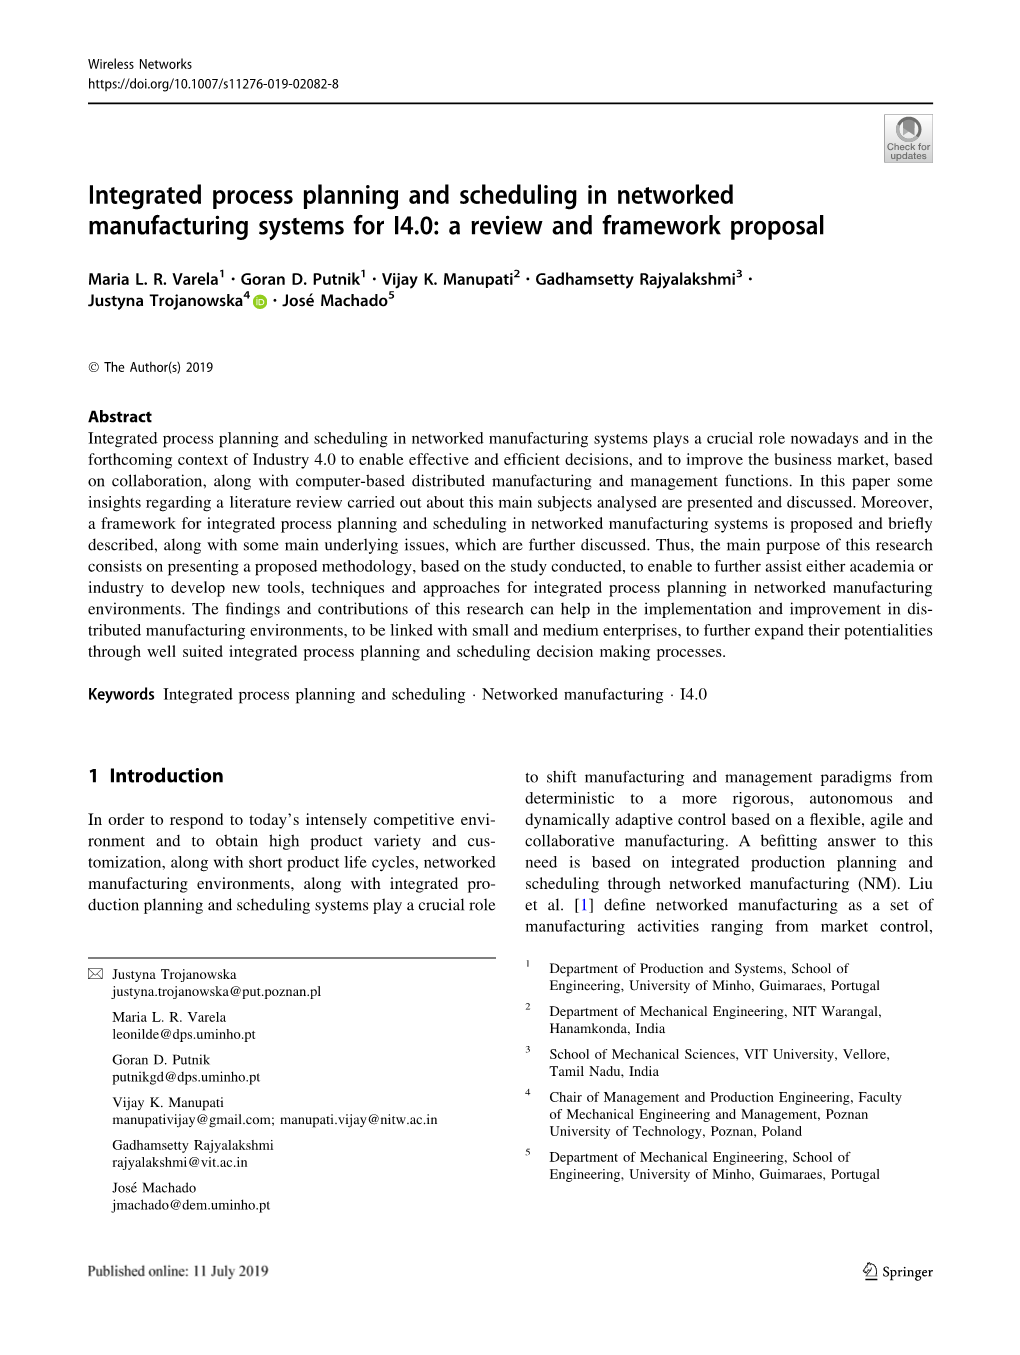 Integrated Process Planning and Scheduling in Networked Manufacturing Systems for I4.0: a Review and Framework Proposal